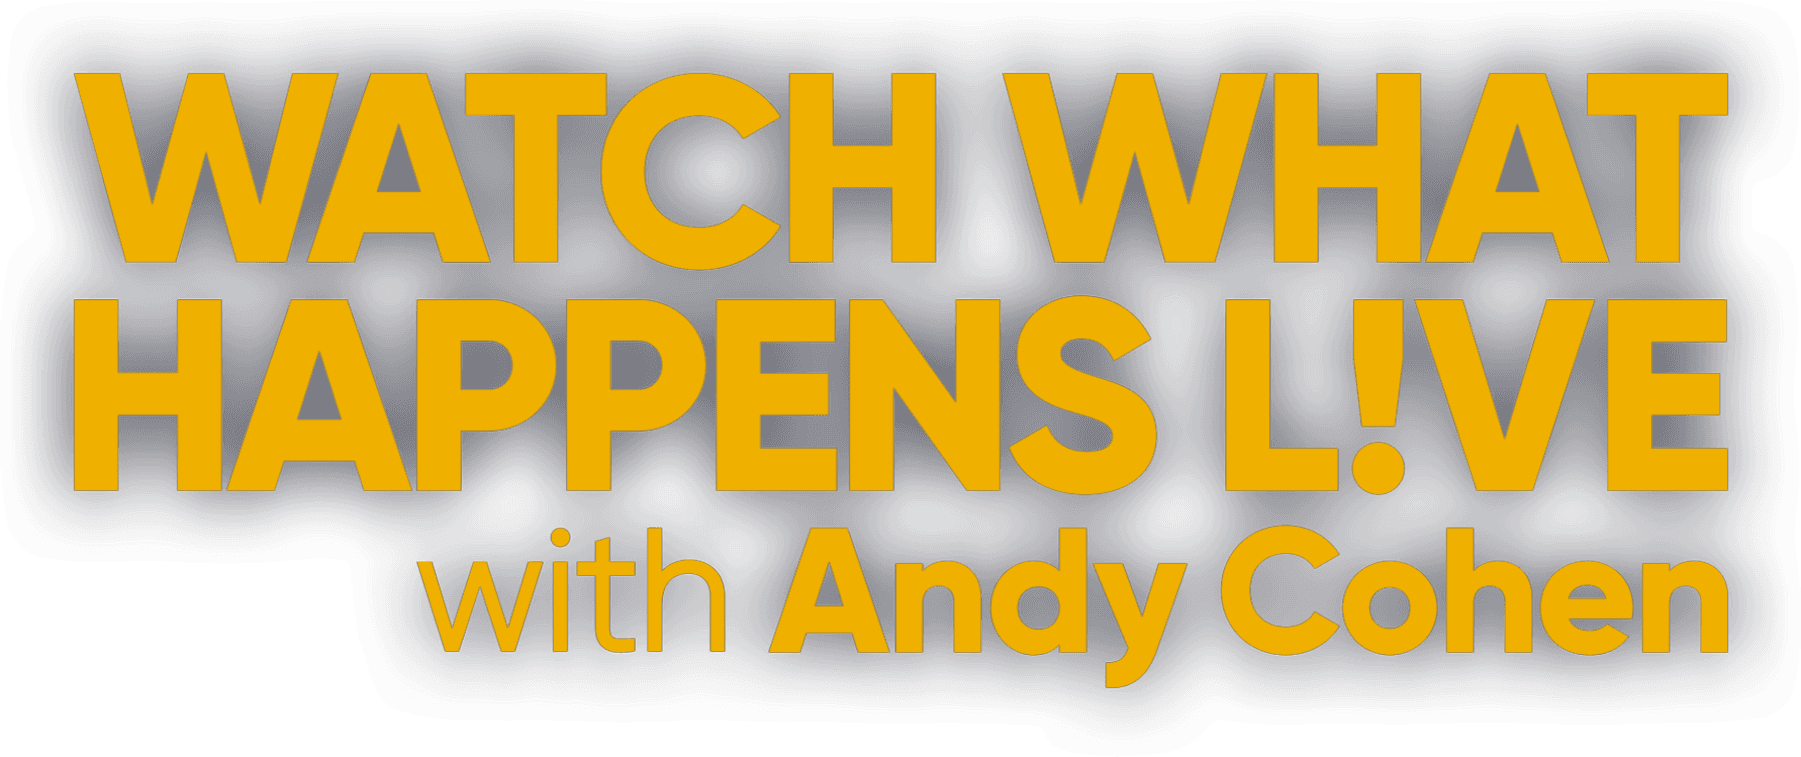 Watch What Happens Live with Andy Cohen logo